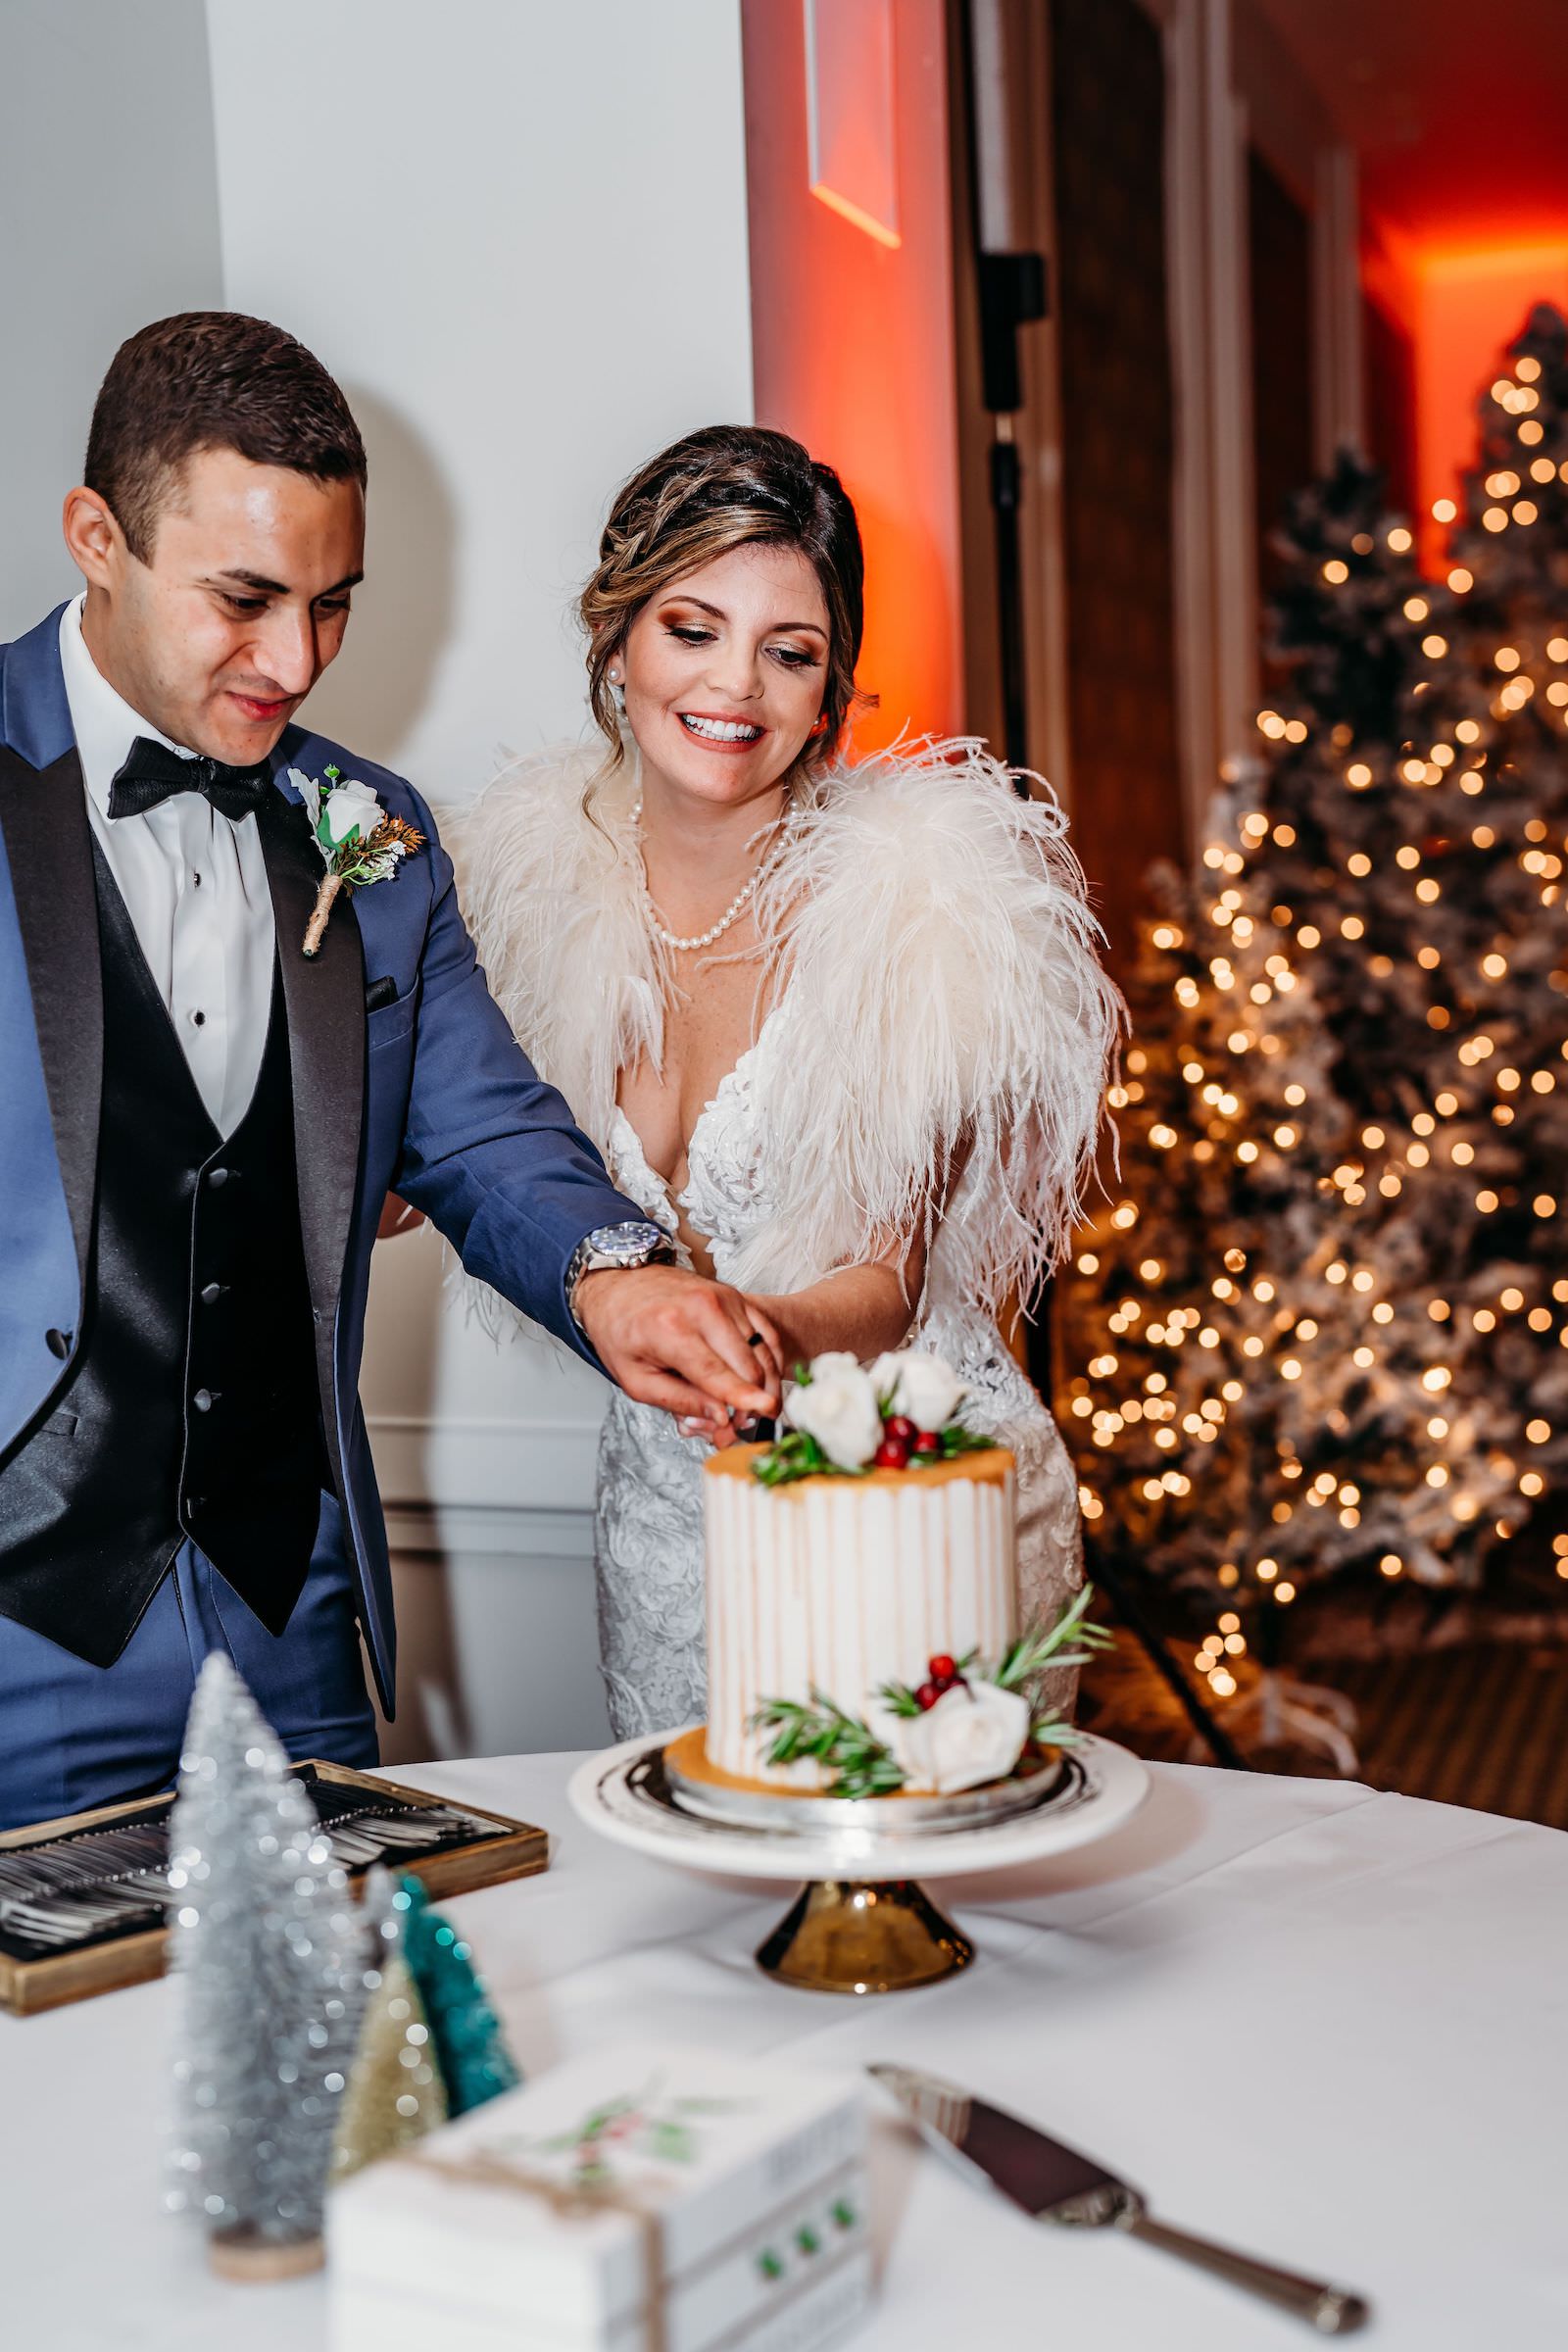 Christmas Wedding, Bride Wearing Feather Shall and Groom Cutting One Tier Wedding Cake